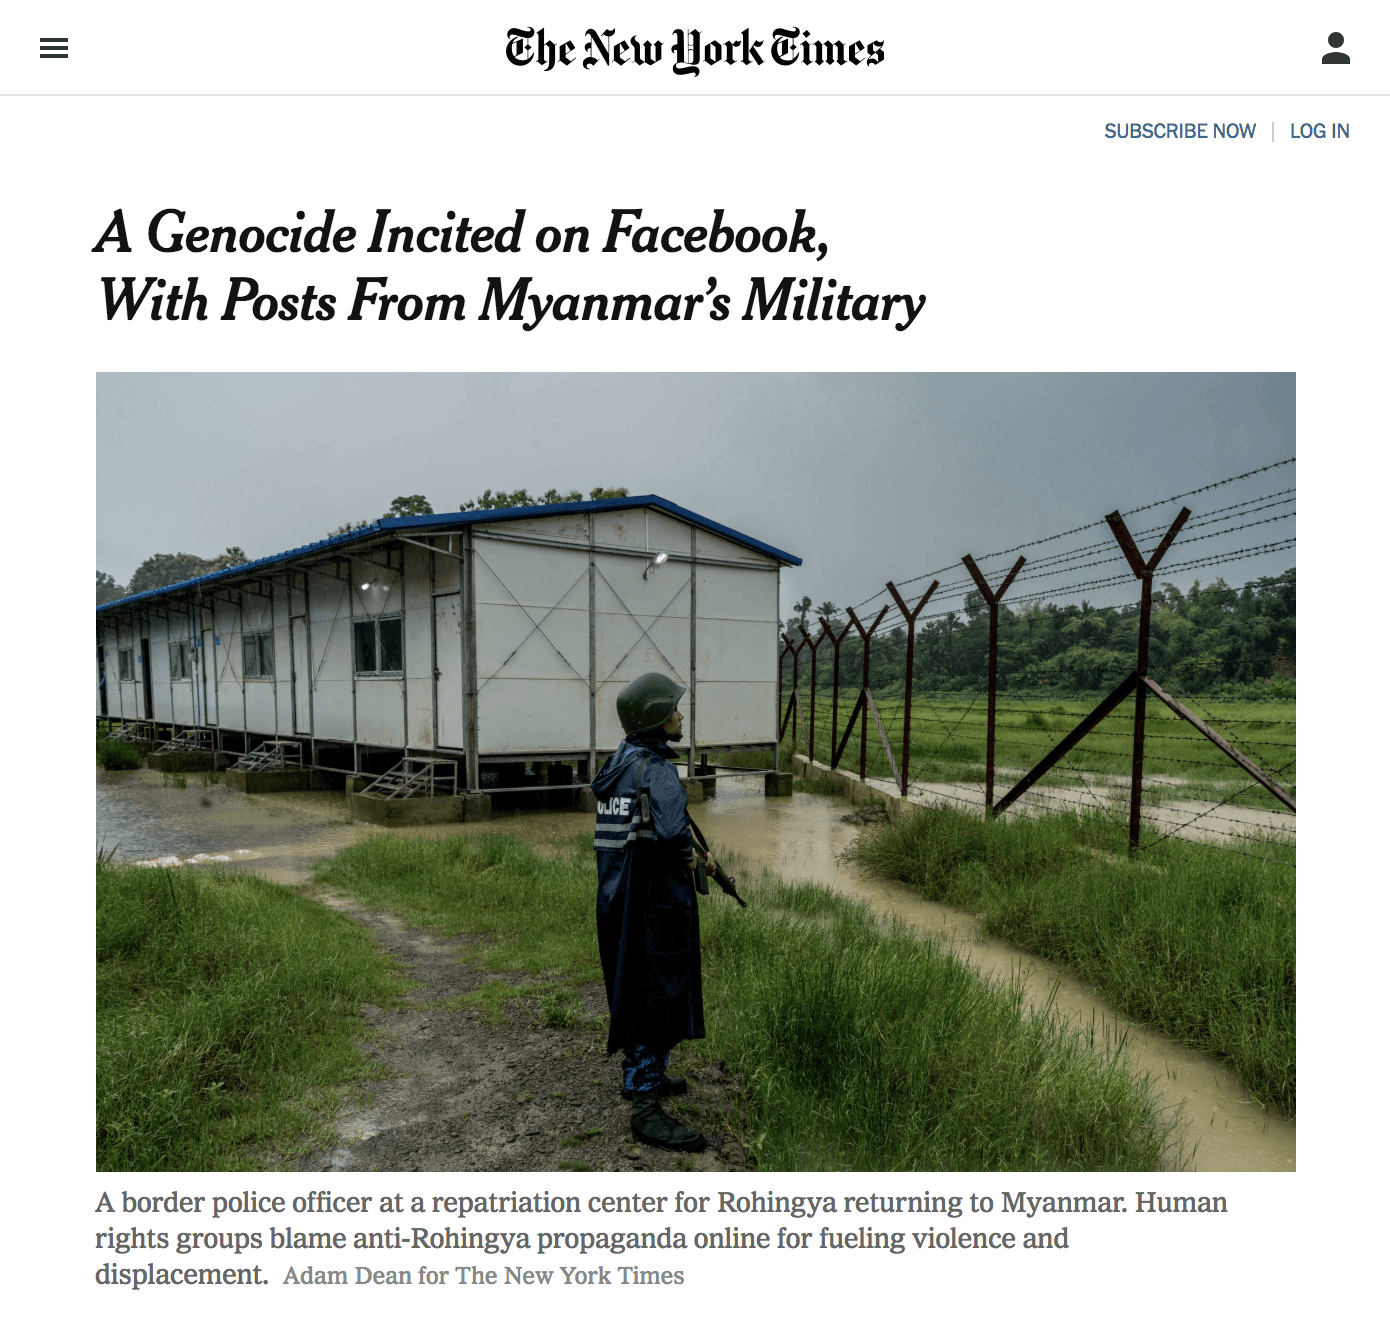 Screenshot from a New York Times article, whose headline is, ‘A Genocide Incited on Facebook, With Posts From Myanmar’s Military.’ Below the headline is a photo of a police officer holding an assault rife standing in front of a high razor wire fence on an overcast day. Below the photo is a caption that reads, ‘A border police officer at a reparation center for Rohingya returning to Myanmar. Human rights groups blame anti-Rohingya propaganda for fueling violence and displacement. Adam Dean for The New York Times.’ FIGCAPTION: Here’s Facebook’s full report.